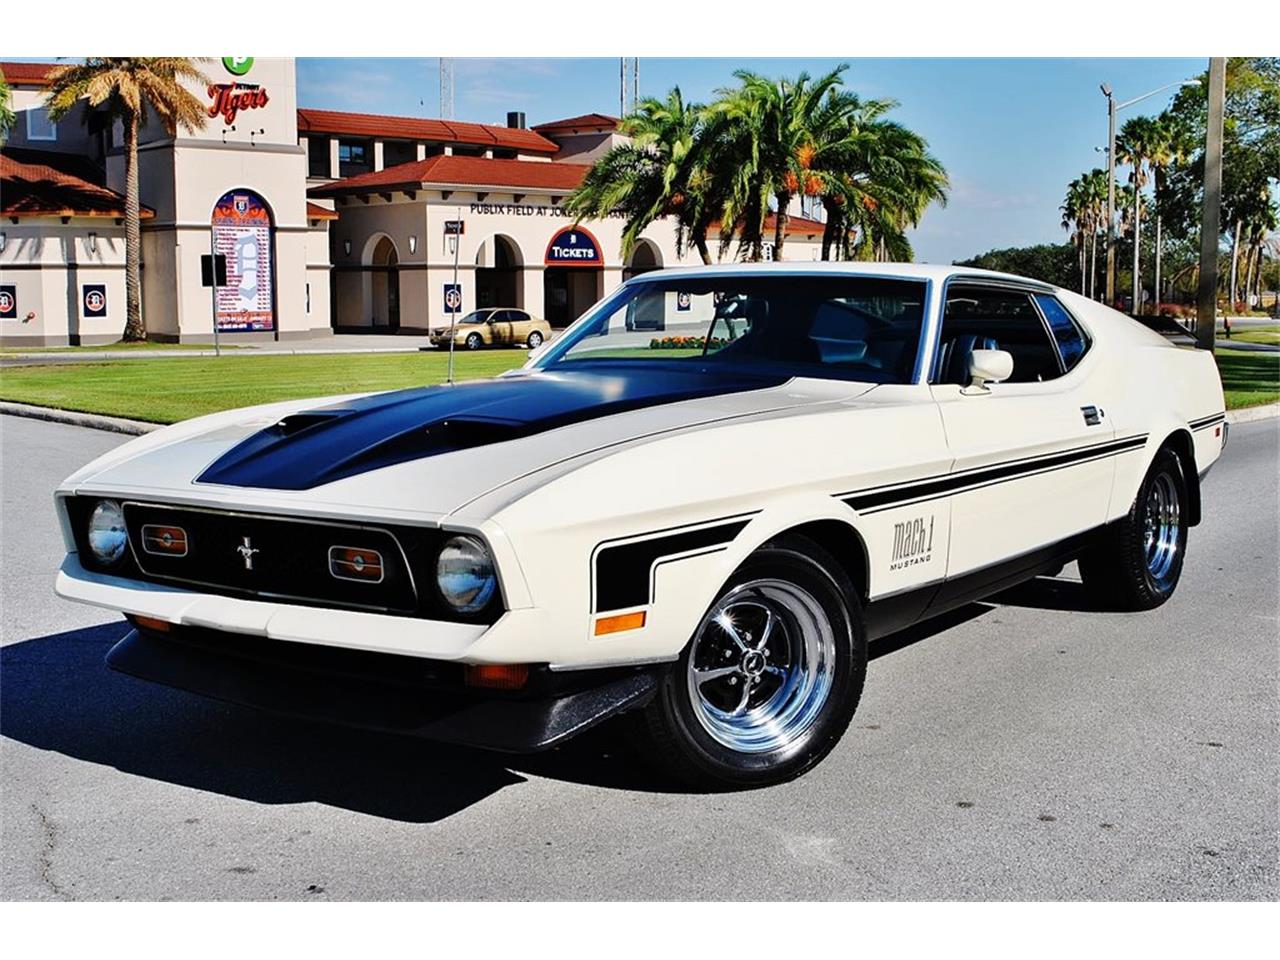 1971 Ford Mustang Mach 1 for Sale | ClassicCars.com | CC-1044161